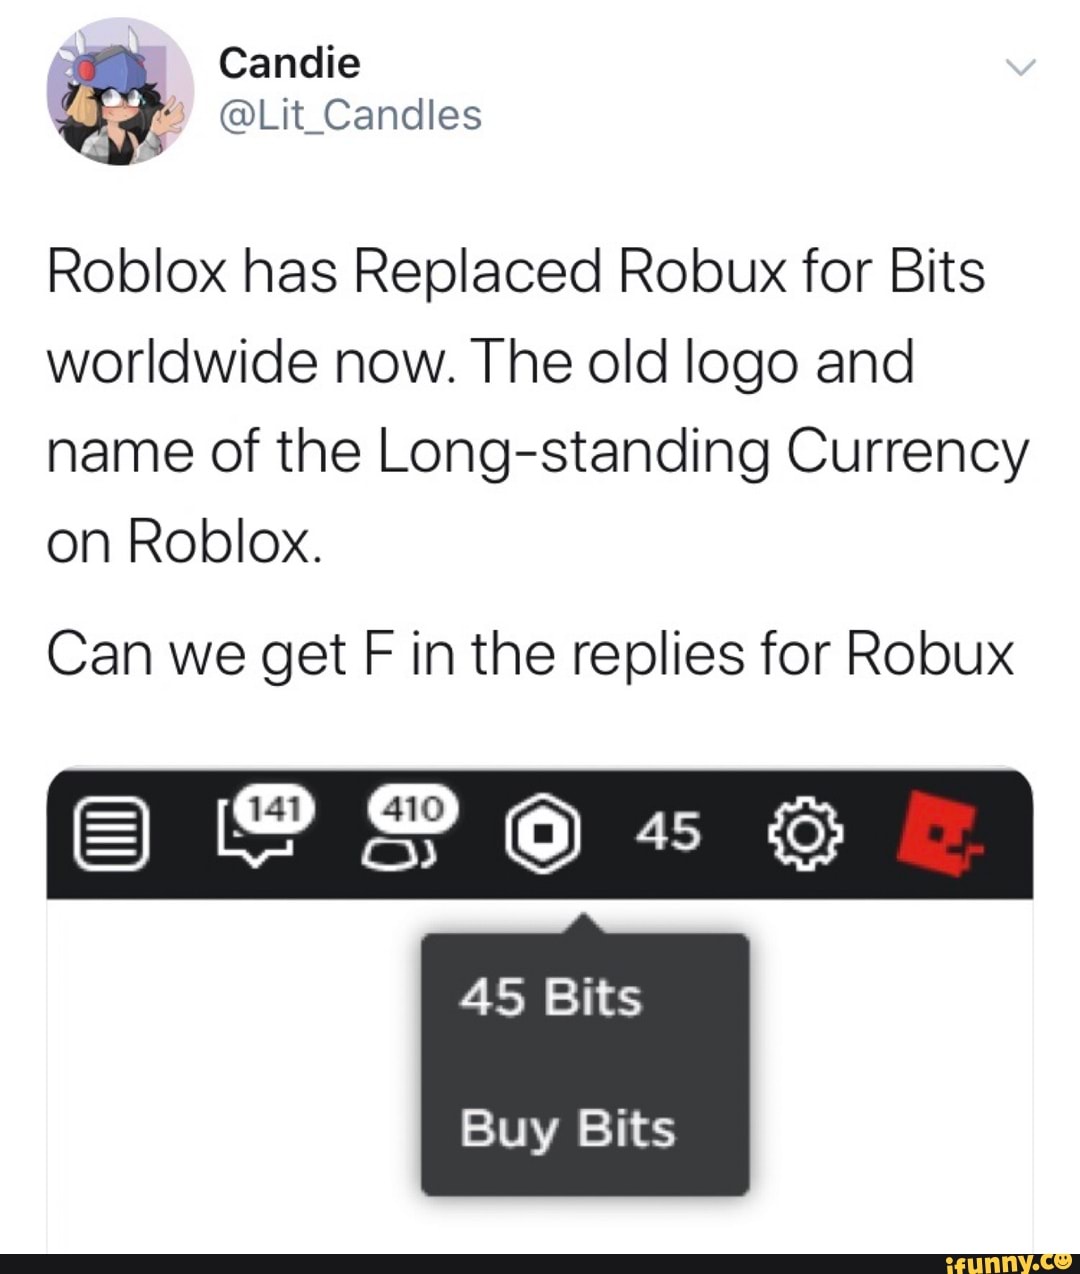 Roblox Has Replaced Robux For Bits Worldwide Now The Old Logo And Name Of The Long Standing Currency On Roblox Can We Get F In The Replies For Robux Ifunny